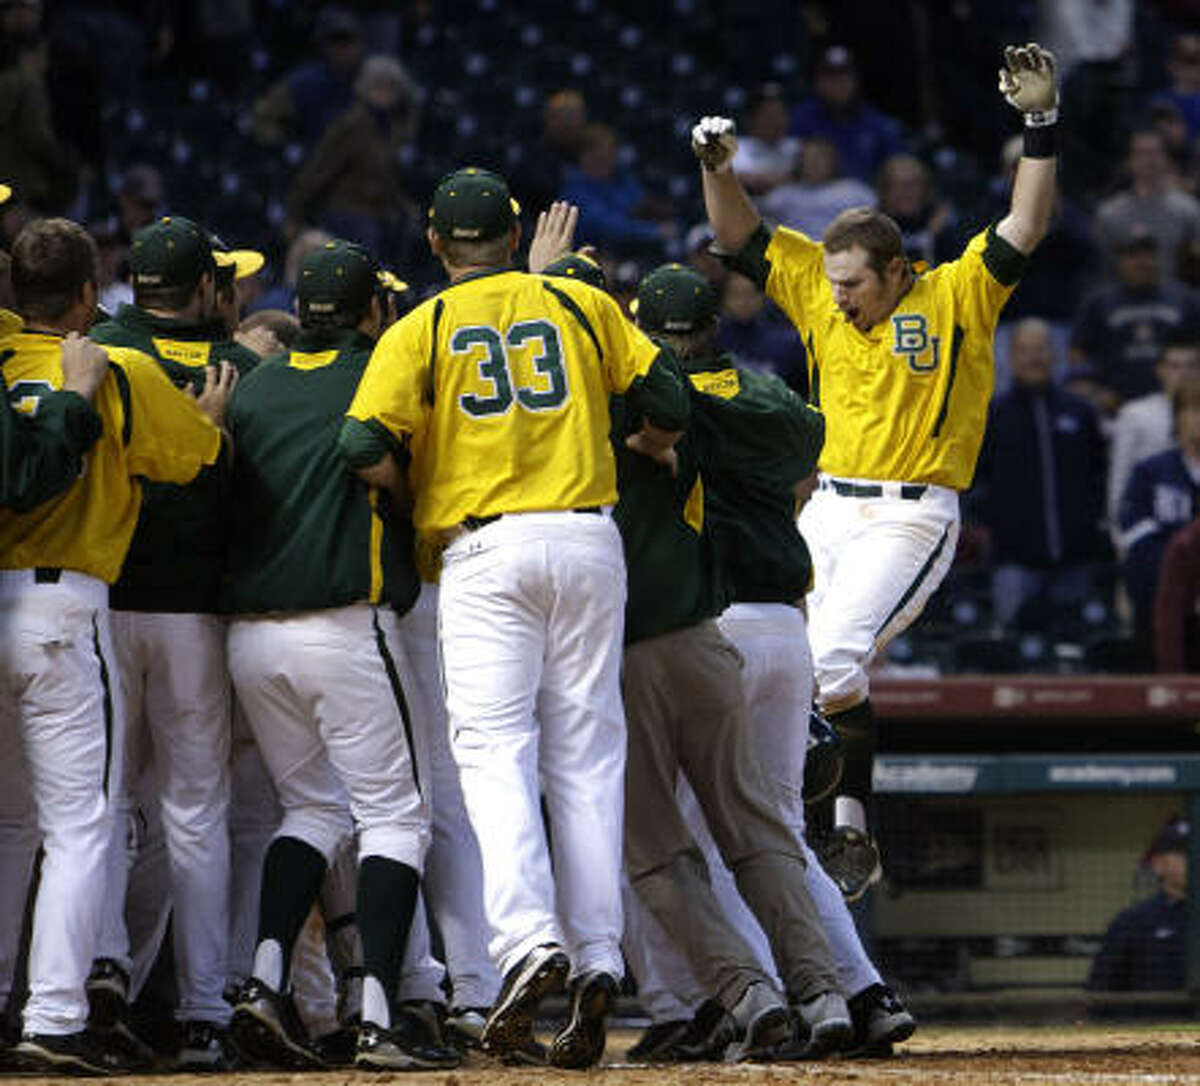 March 6: Baylor 12, Rice 8 (10 innings) Baylor's Max Muncy, right, is greeted at home by his teammates after hitting a grand slam in the bottom of the tenth inning to give Baylor the win over Rice.